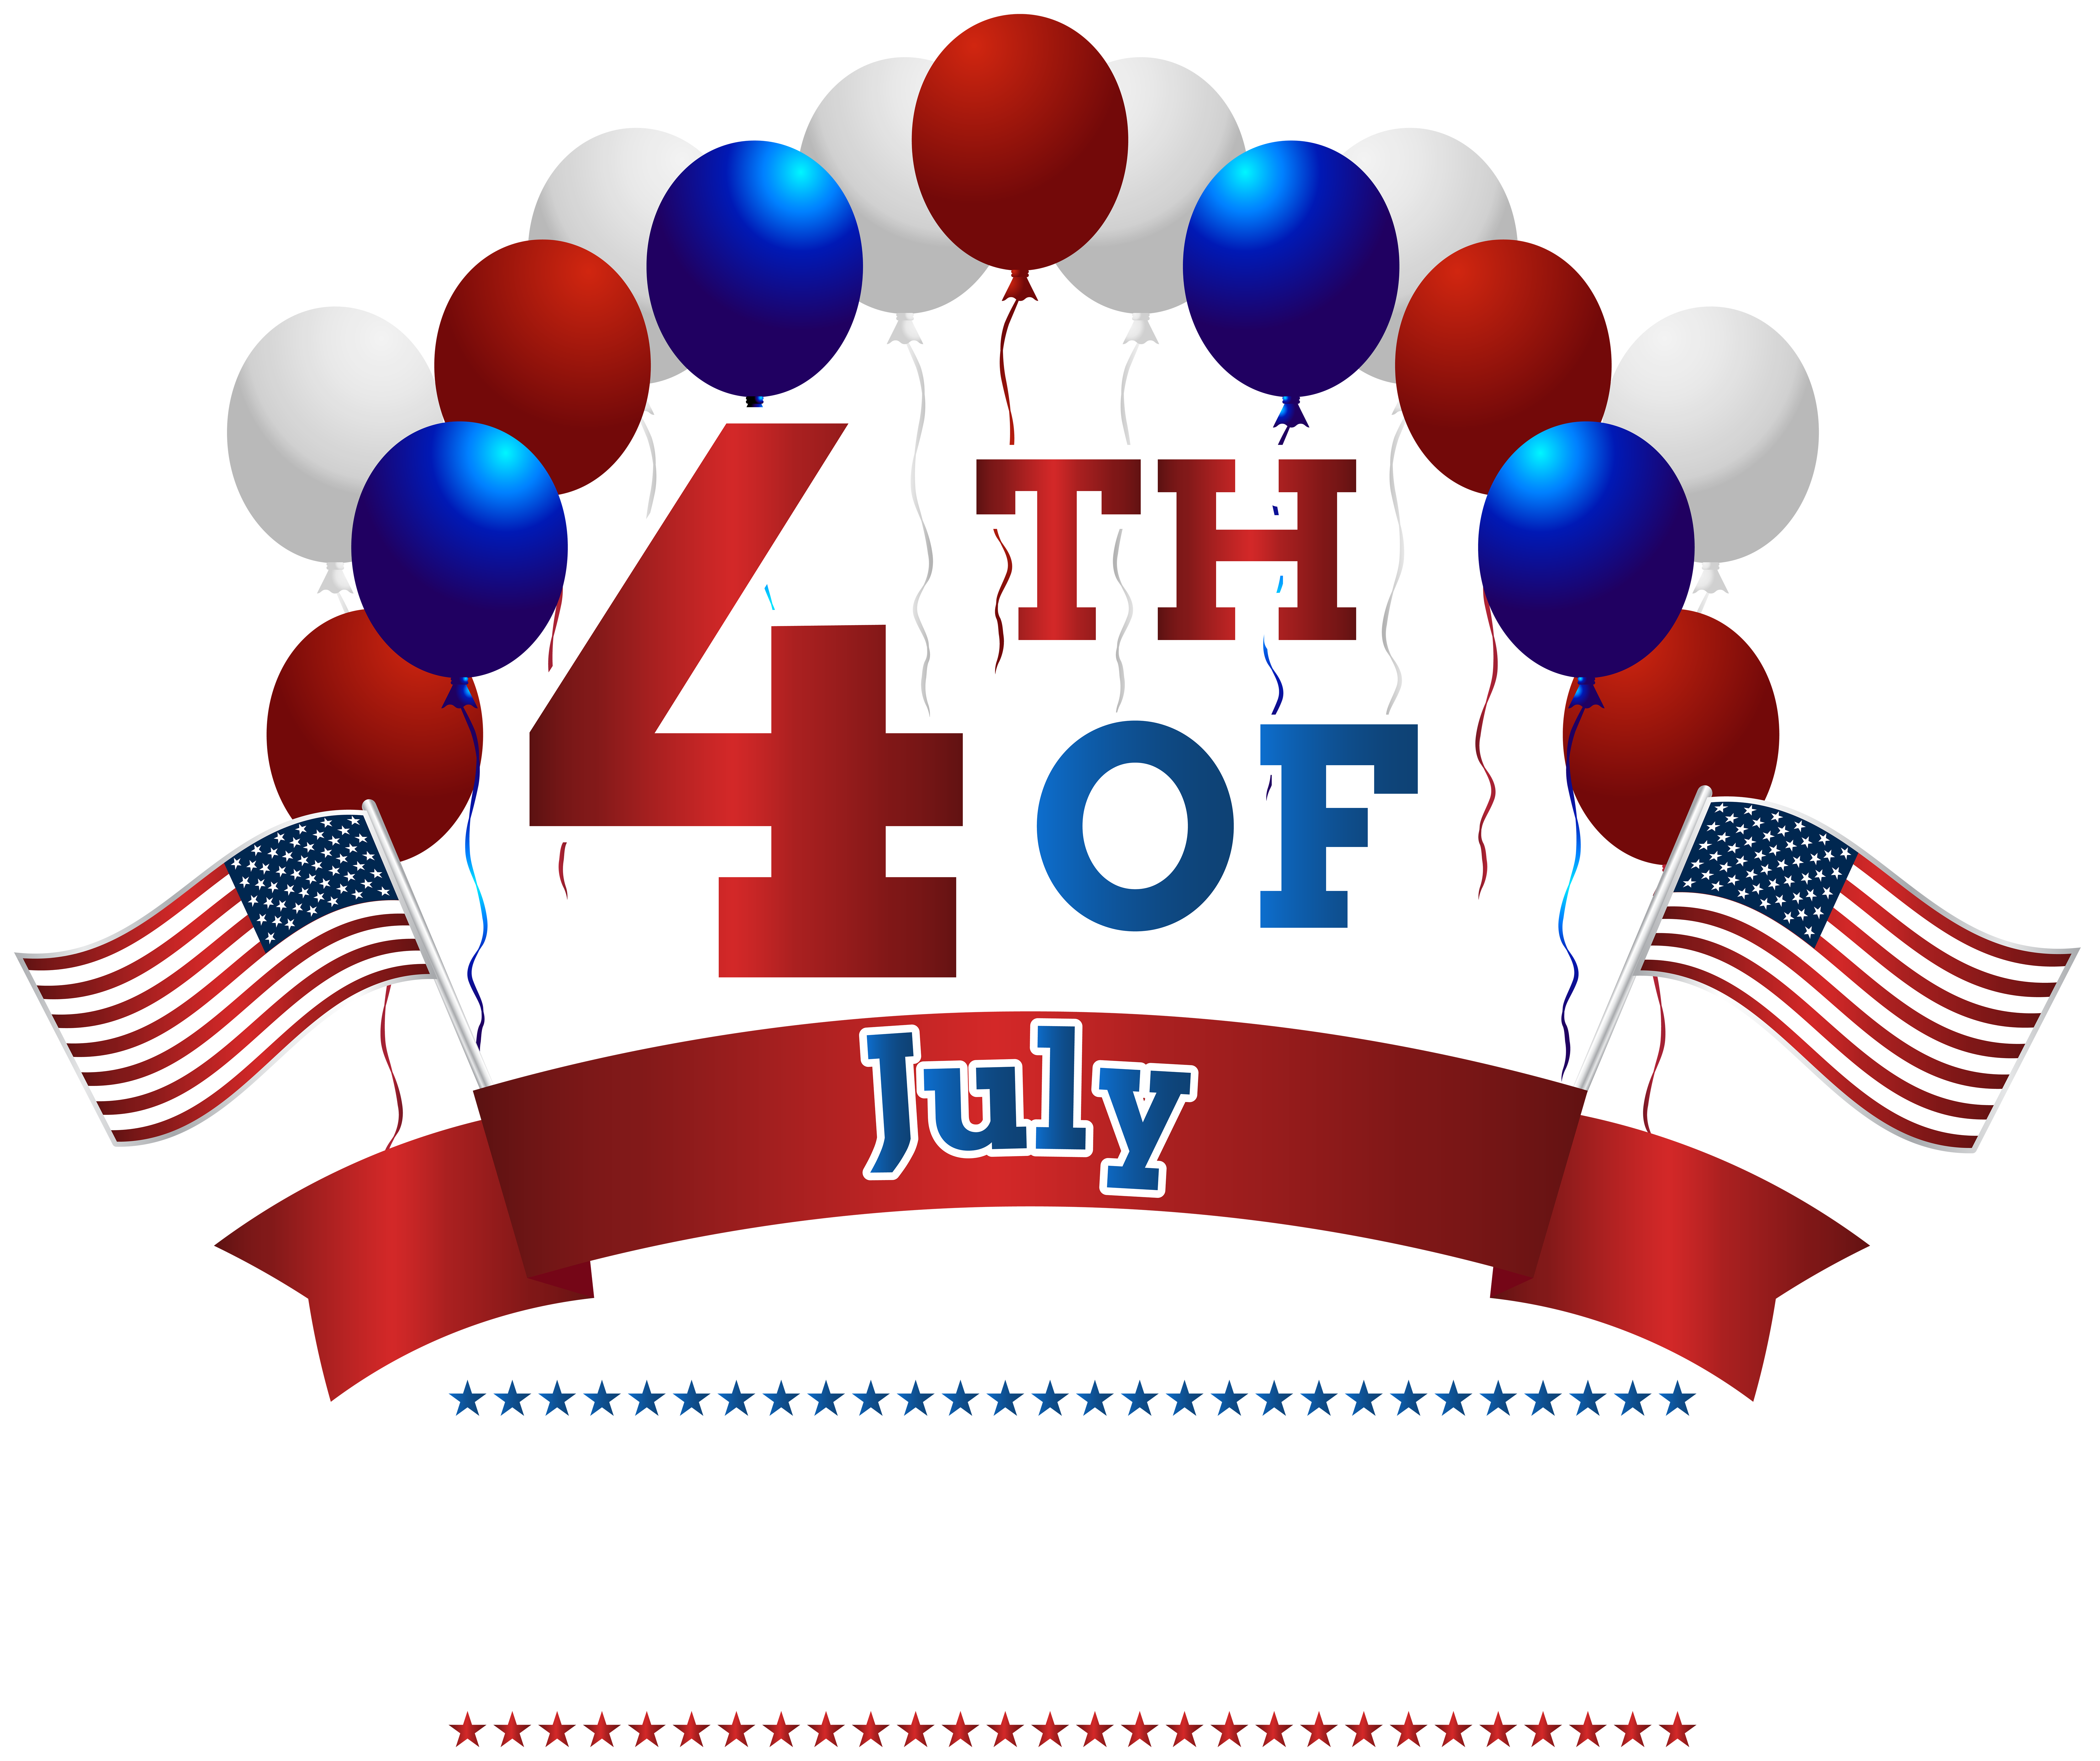 free clipart images 4th of july - photo #24